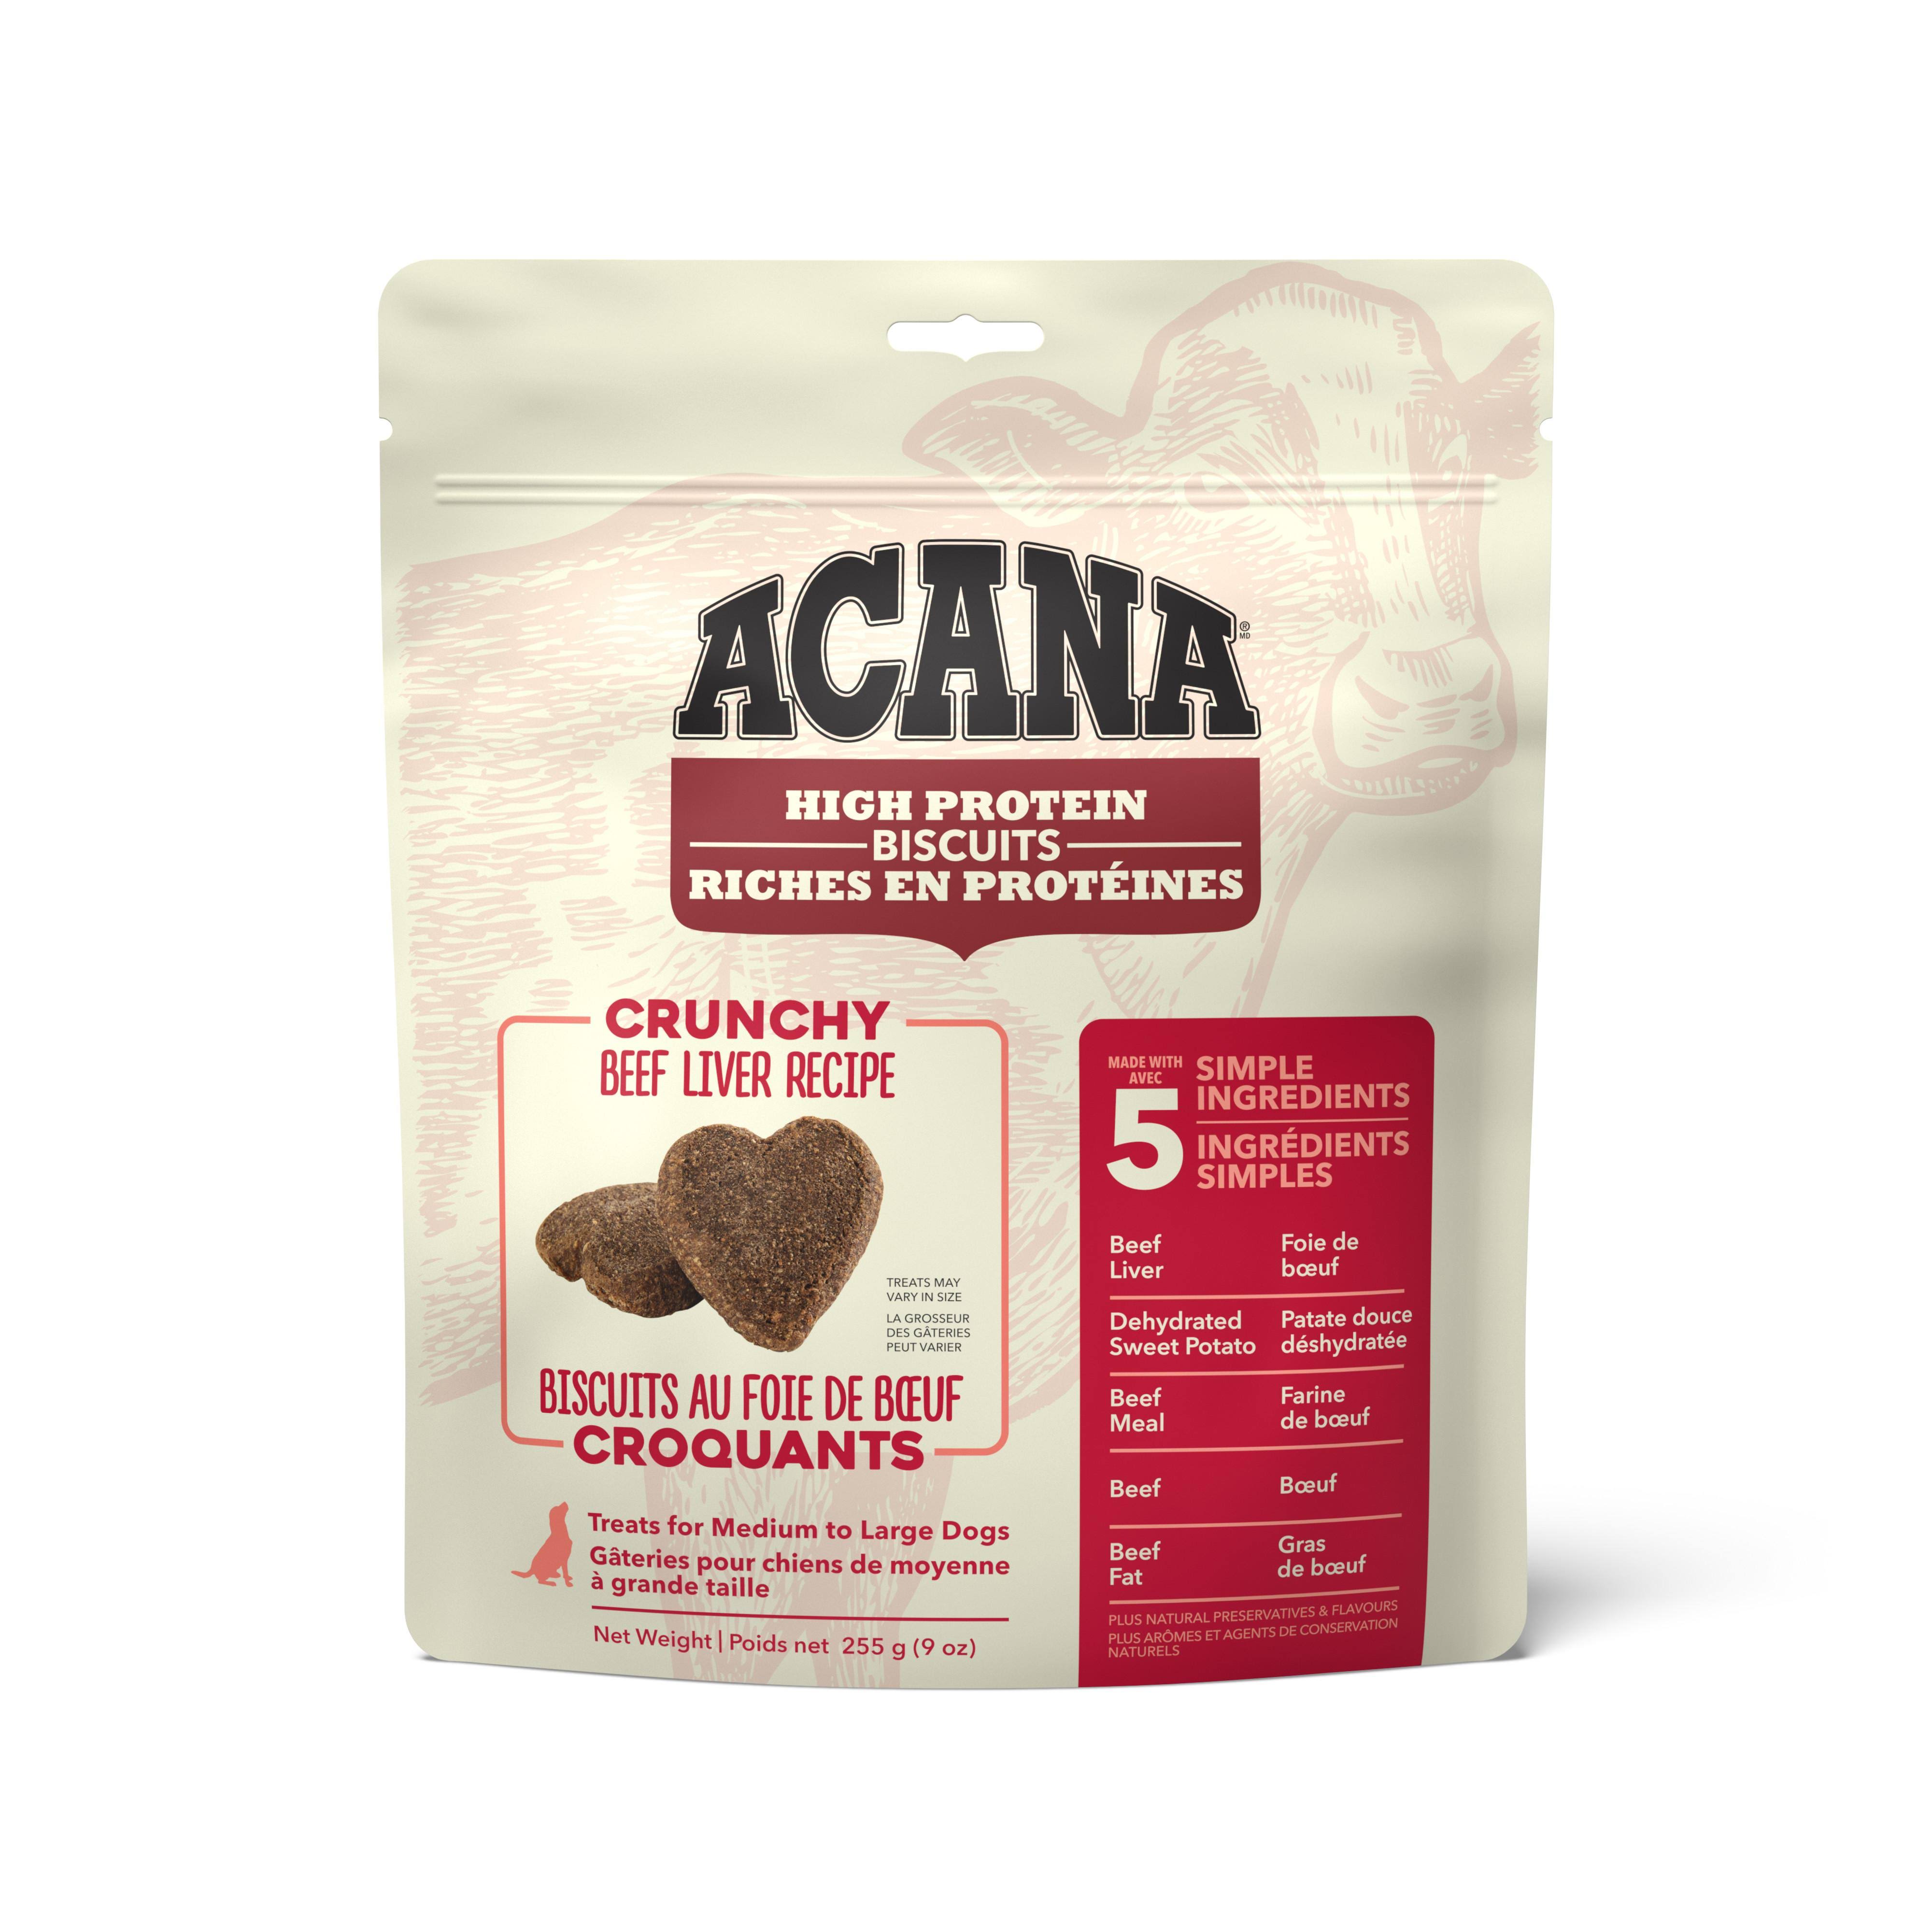 ACANA Crunchy Biscuits Dog, High Protein, Treats Beef Liver Recipe, Large - 9 oz